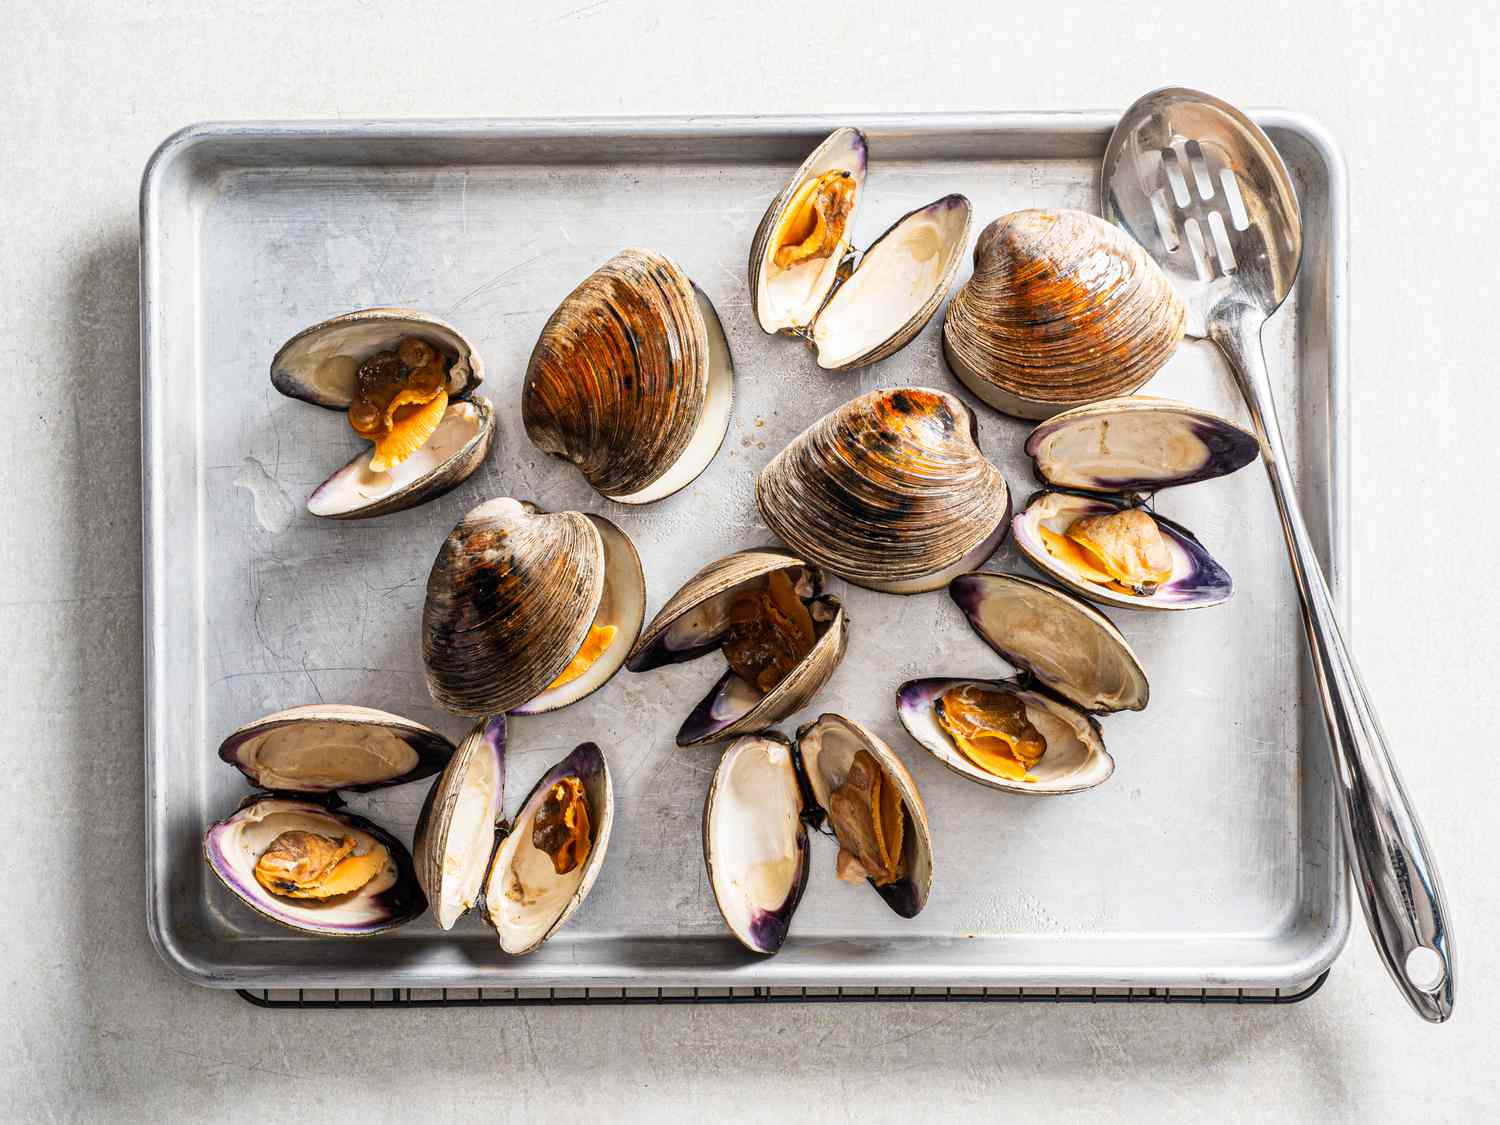 Overhead view of steamed open clams on a baking sheet